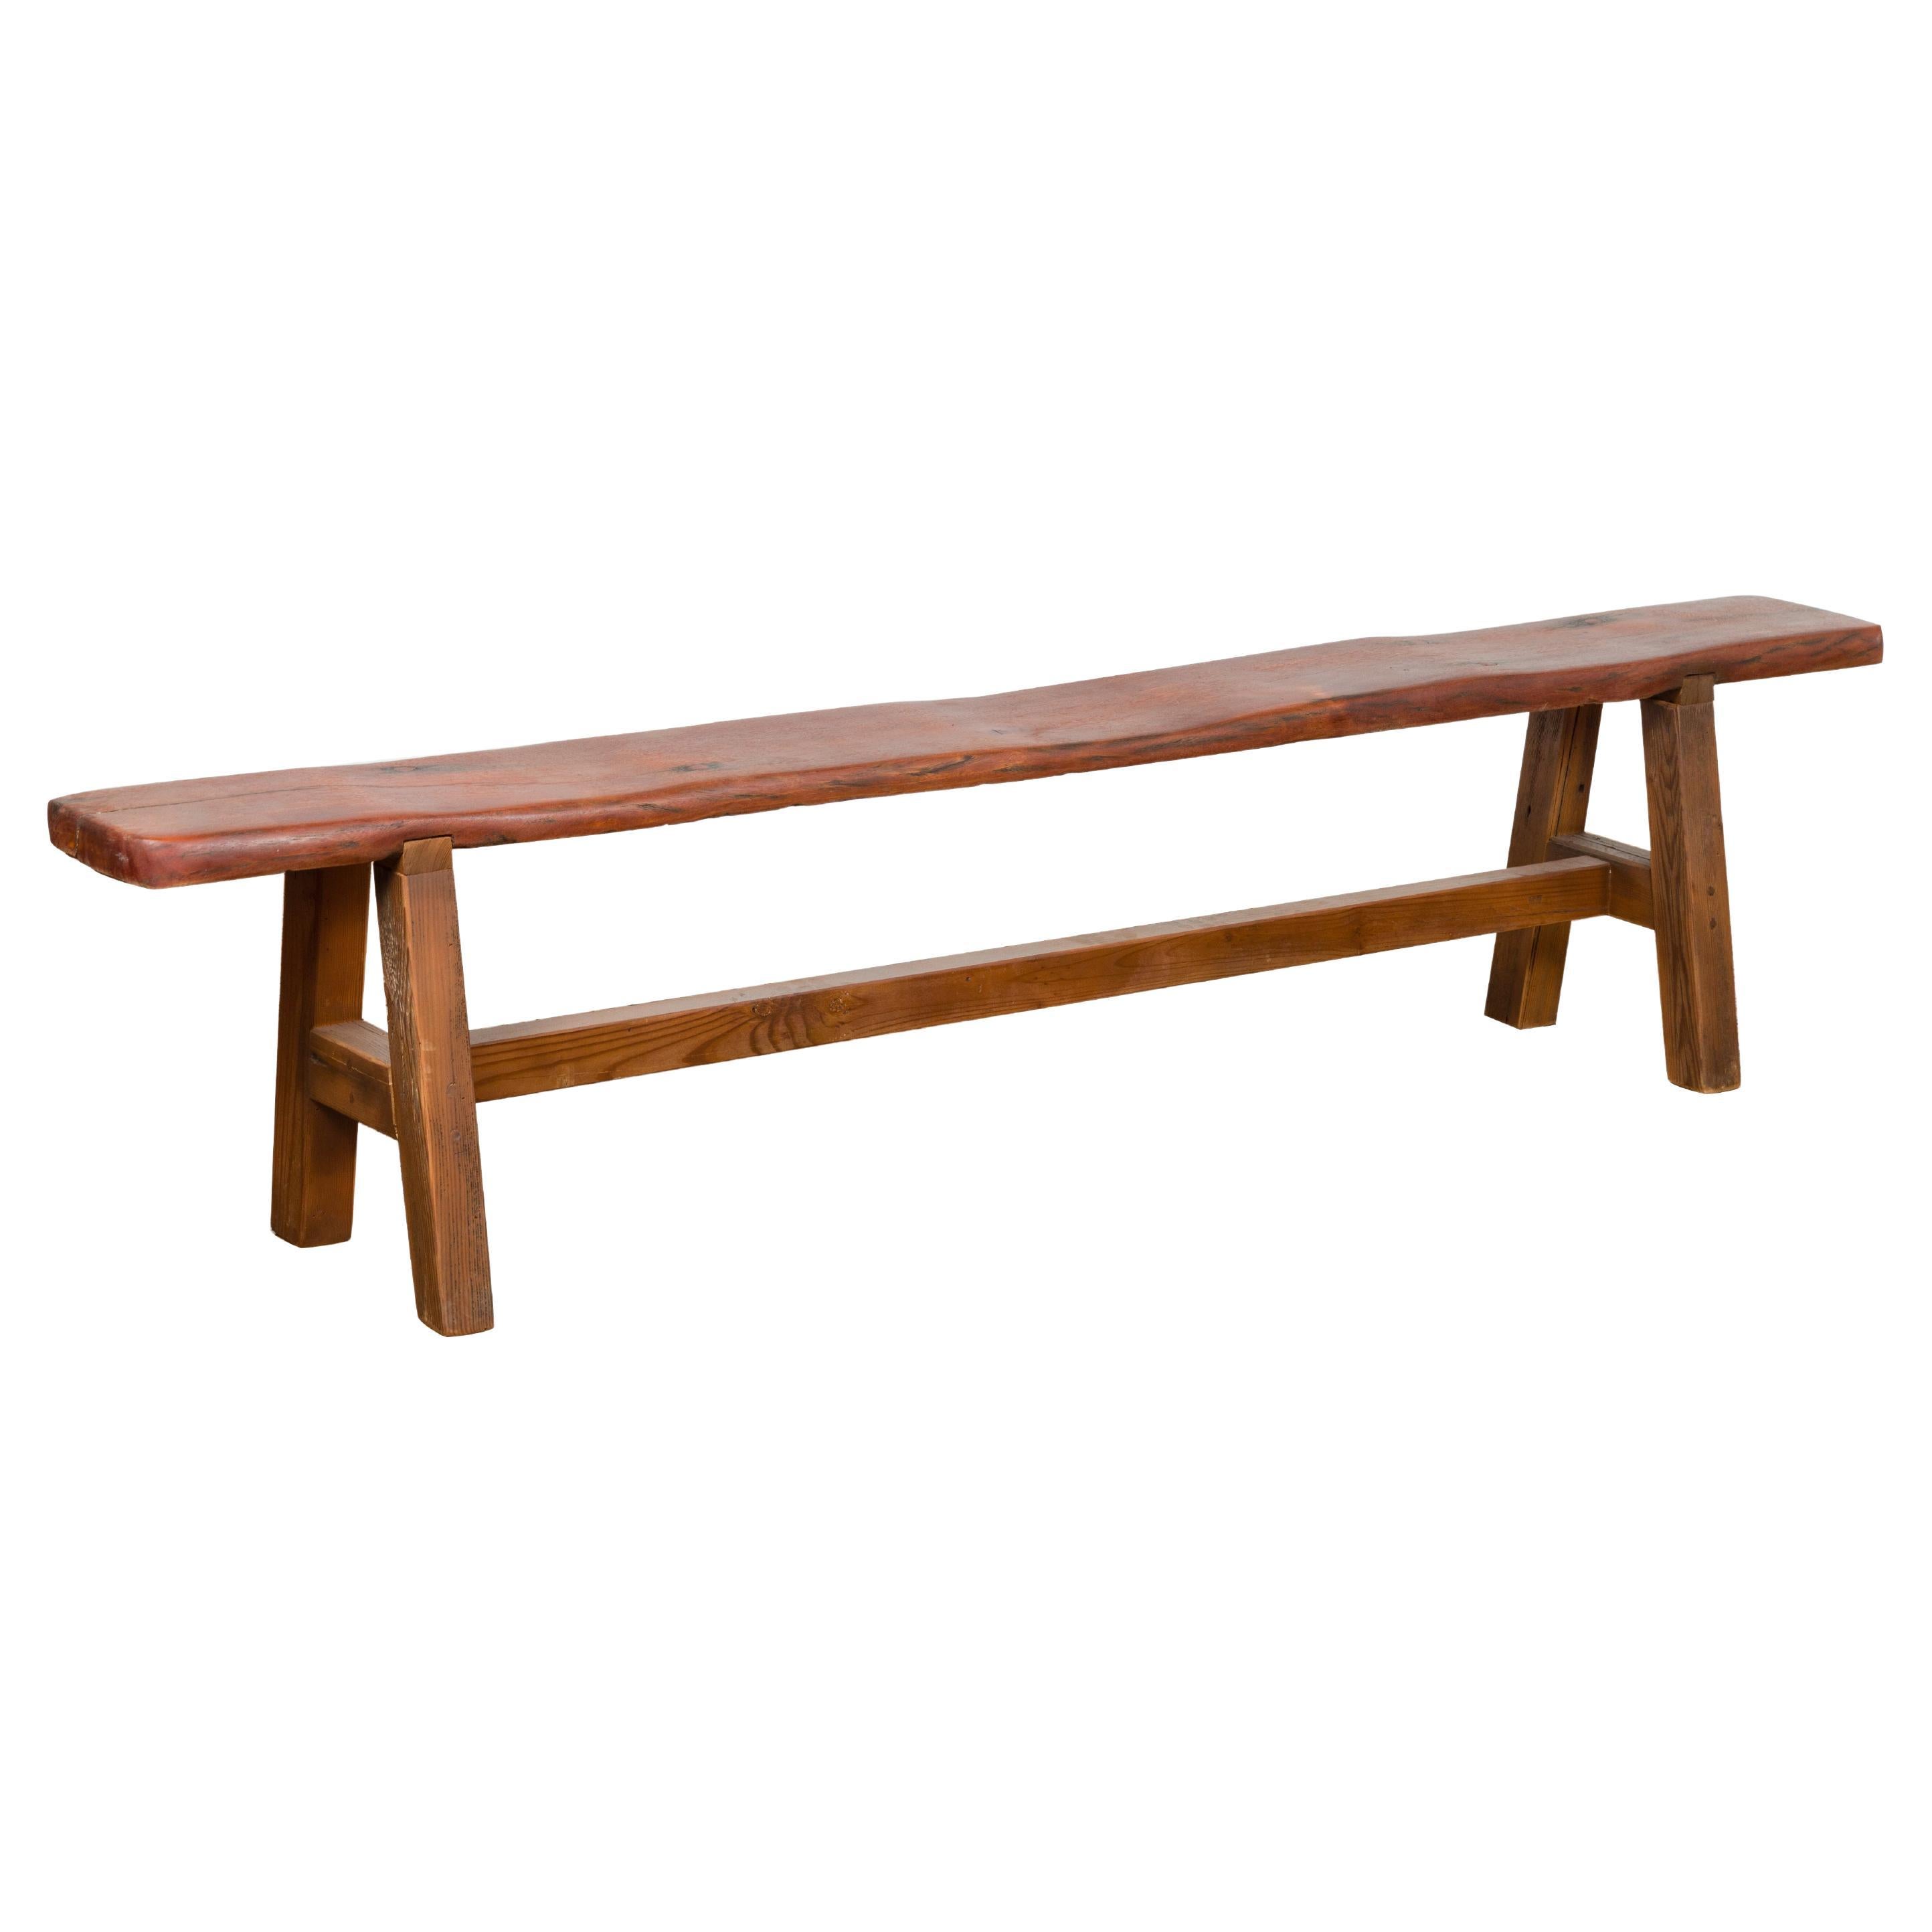 Rustic Long A-Frame Wooden Bench with Cross Stretcher and Splaying Legs For Sale